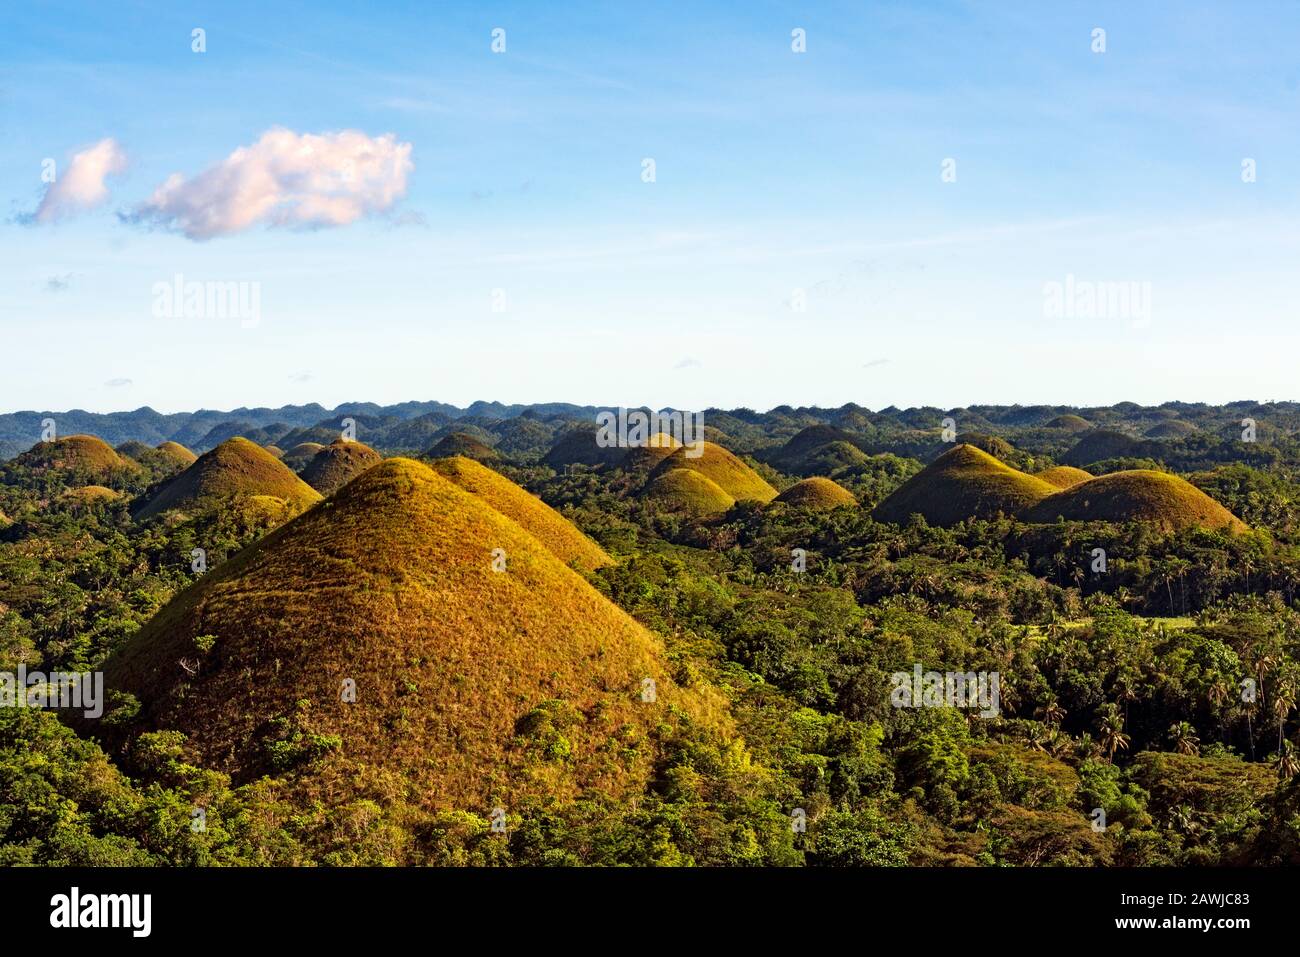 The Chocolate hills in Bohol, Philippines Stock Photo